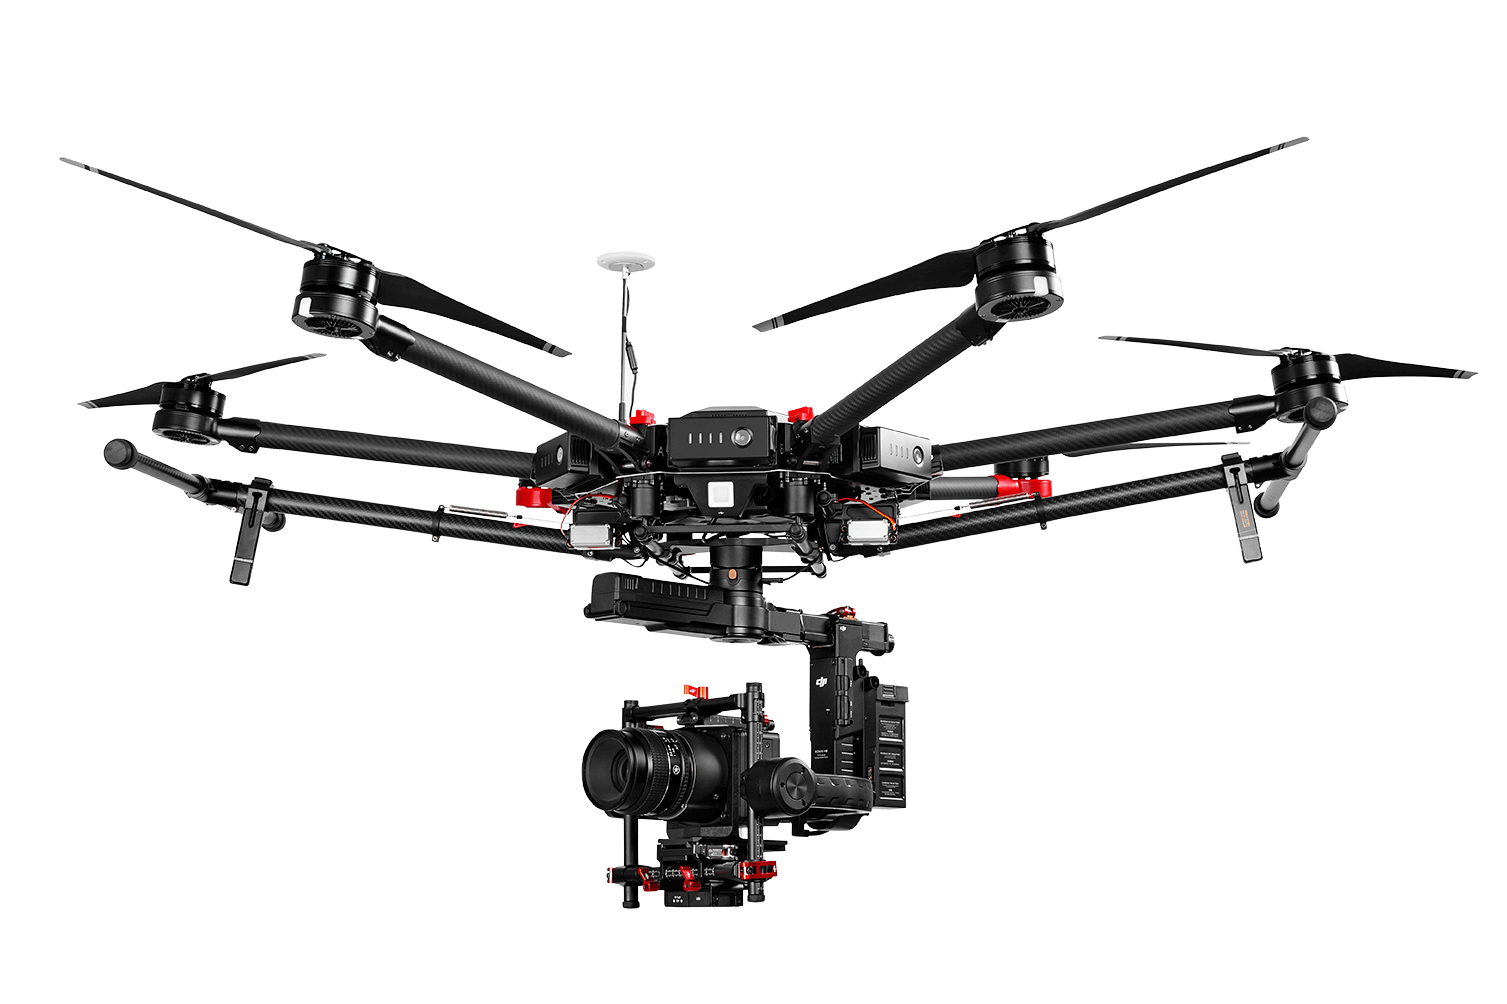 Phase One Adds Support for DJI Drones to its Aerial Camera Offering – sUAS News – The Business of Drones